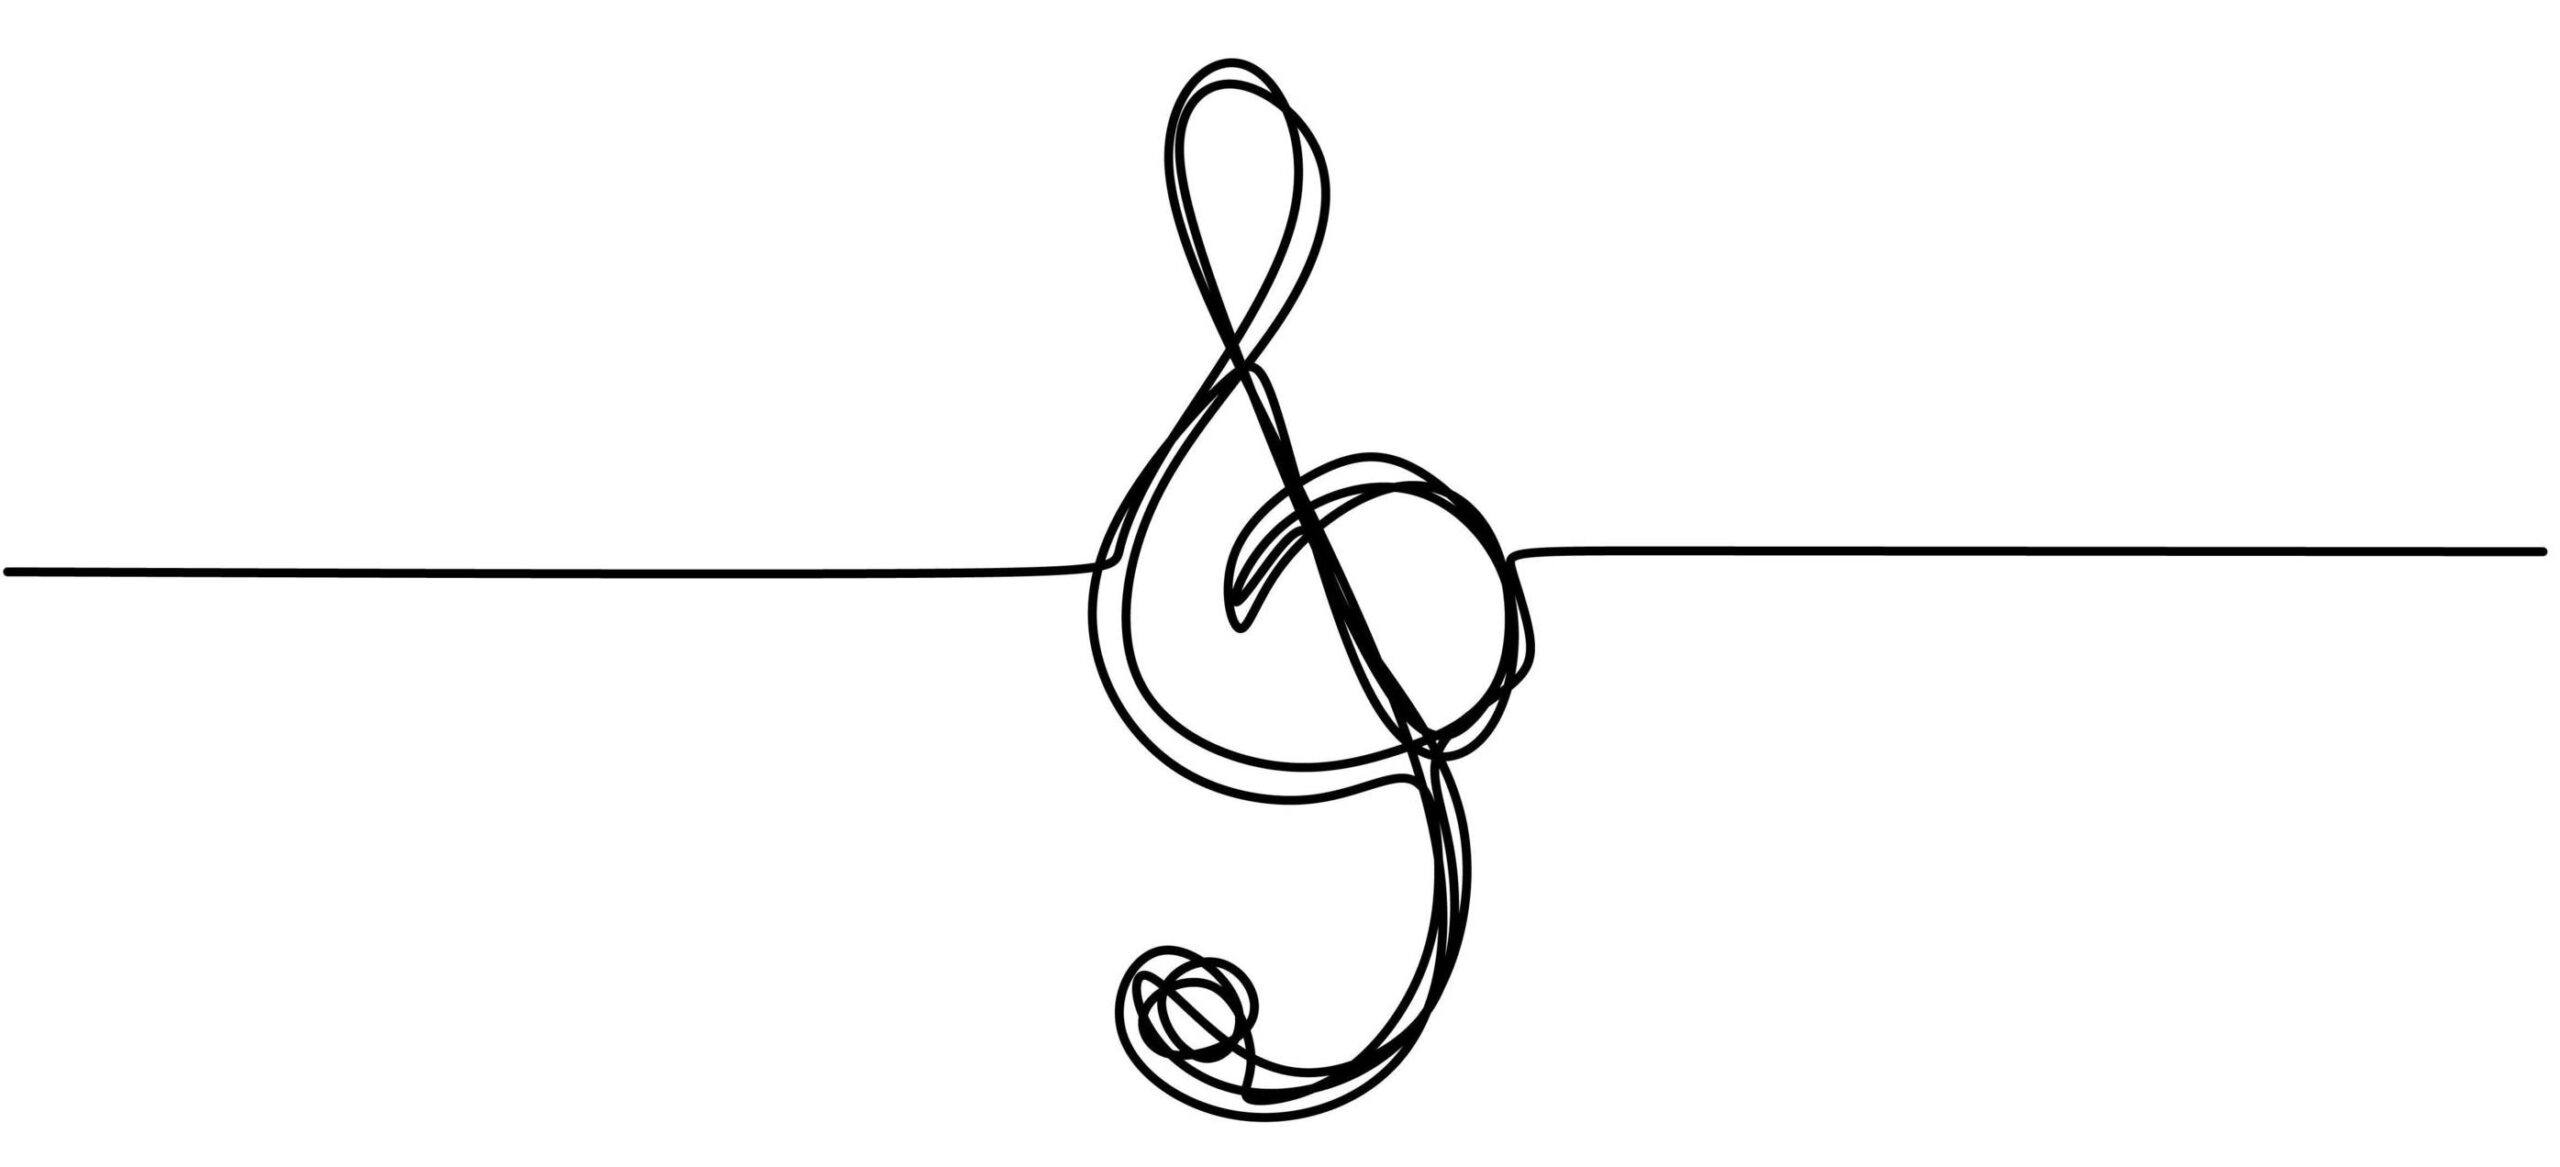 treble-clef-is-drawn-by-a-single-black-one-line-isolated-on-a-white-background-one-line-drawing-continuous-line-minimalism-scribble-style-vector